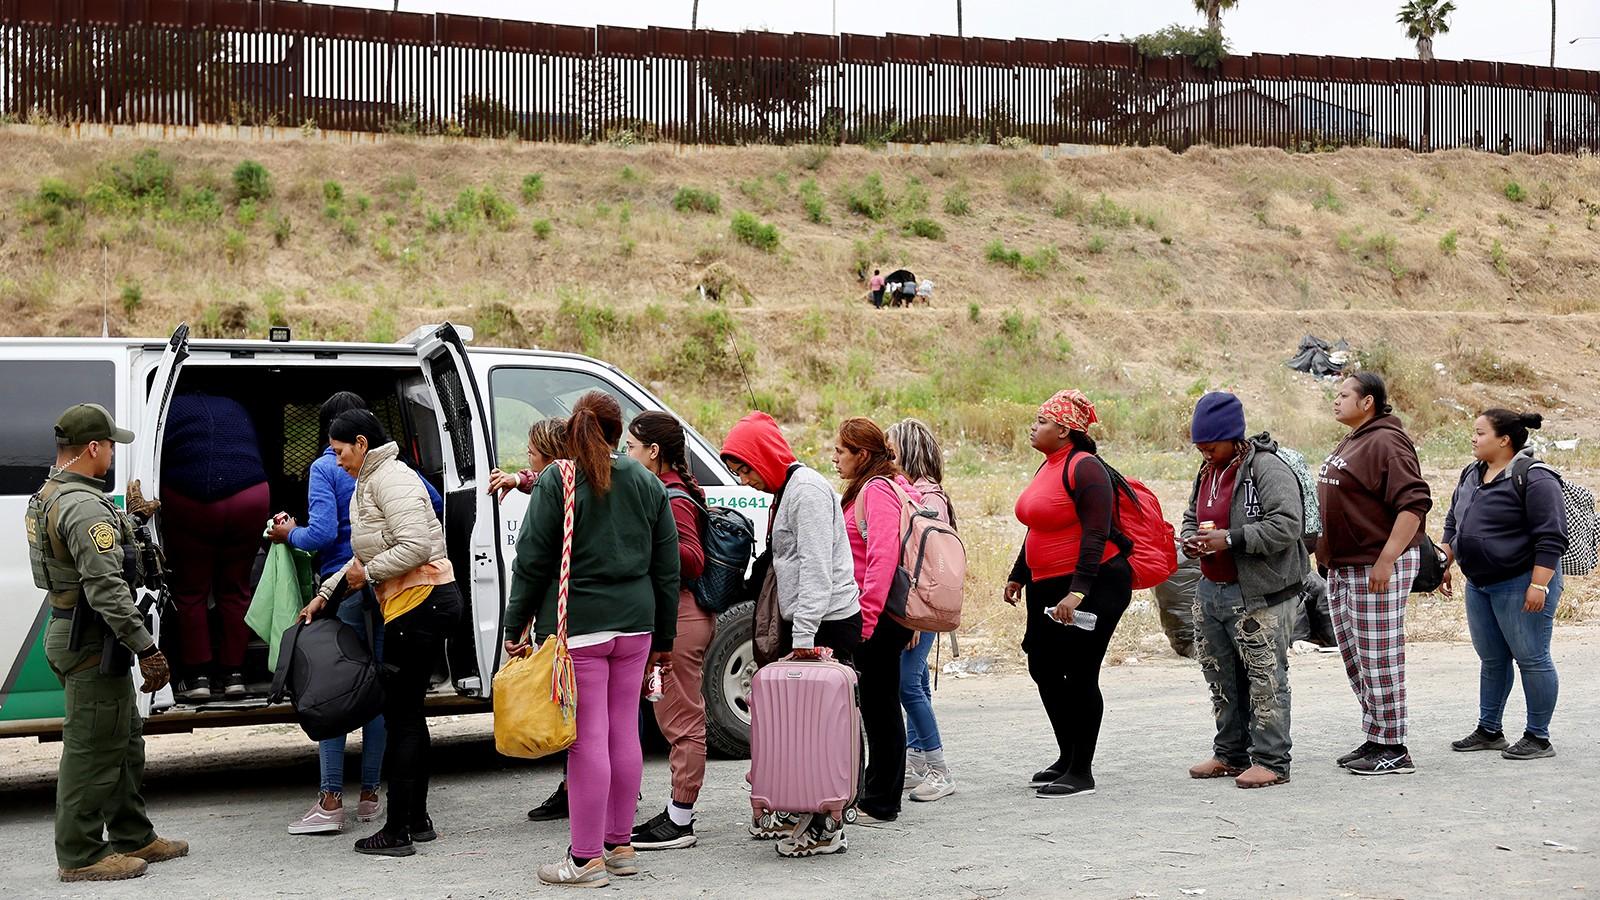 A Border Patrol agent keeps watch as immigrants enter a vehicle to be transported from a makeshift camp on May 13, 2023 in San Diego, California. (Maria Tama / Getty Images via CNN)